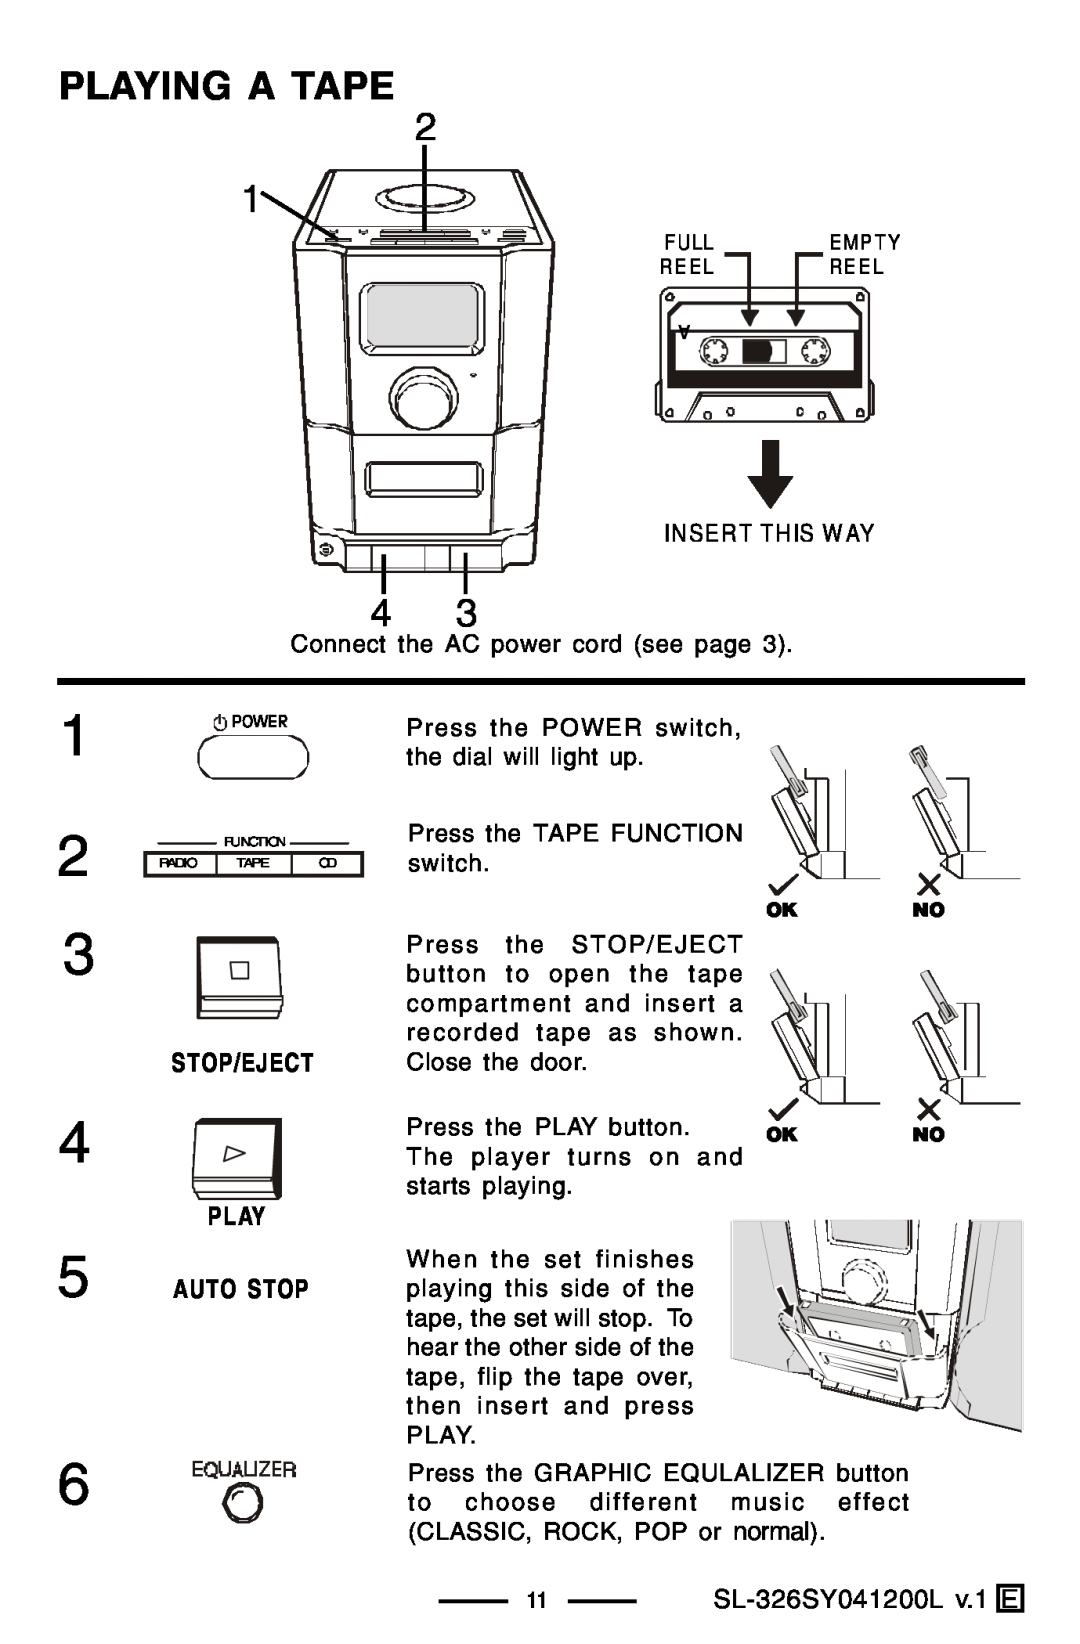 Lenoxx Electronics manual 1 2, Playing A Tape, Stop/Eject Play Auto Stop, 11SL-326SY041200Lv.1 E 